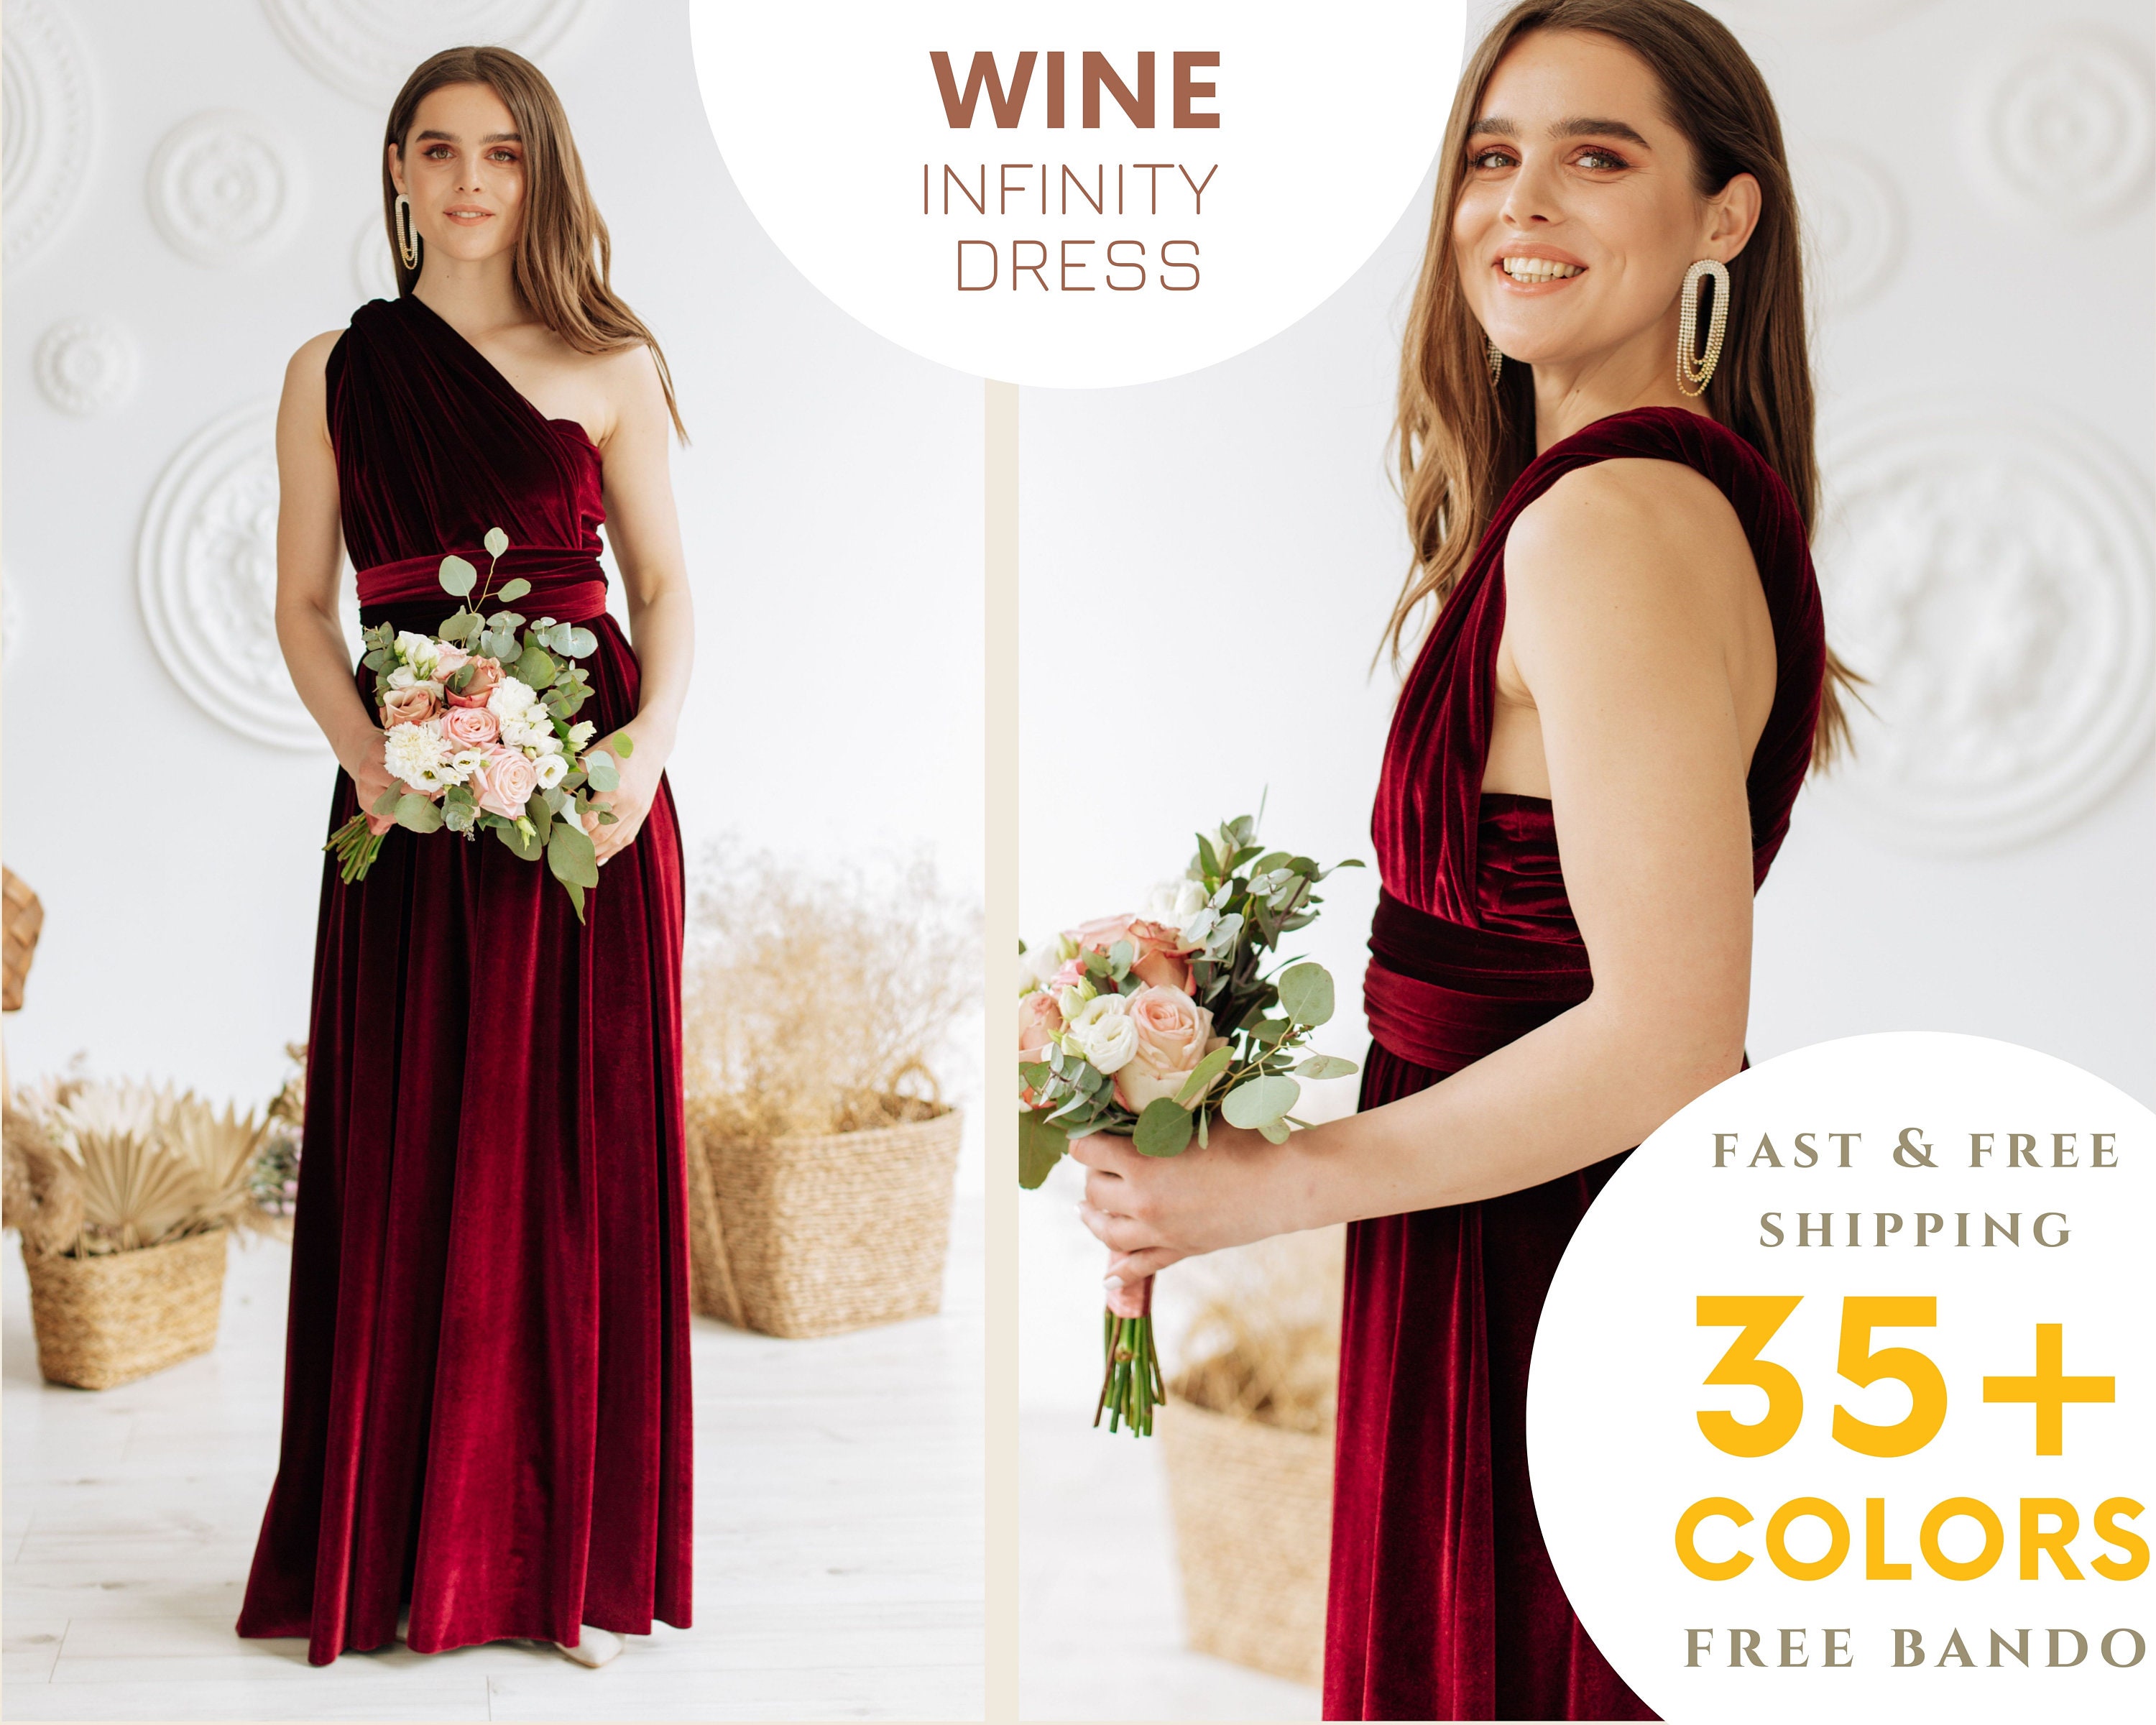 Convertible bridesmaid dresses by Revelry